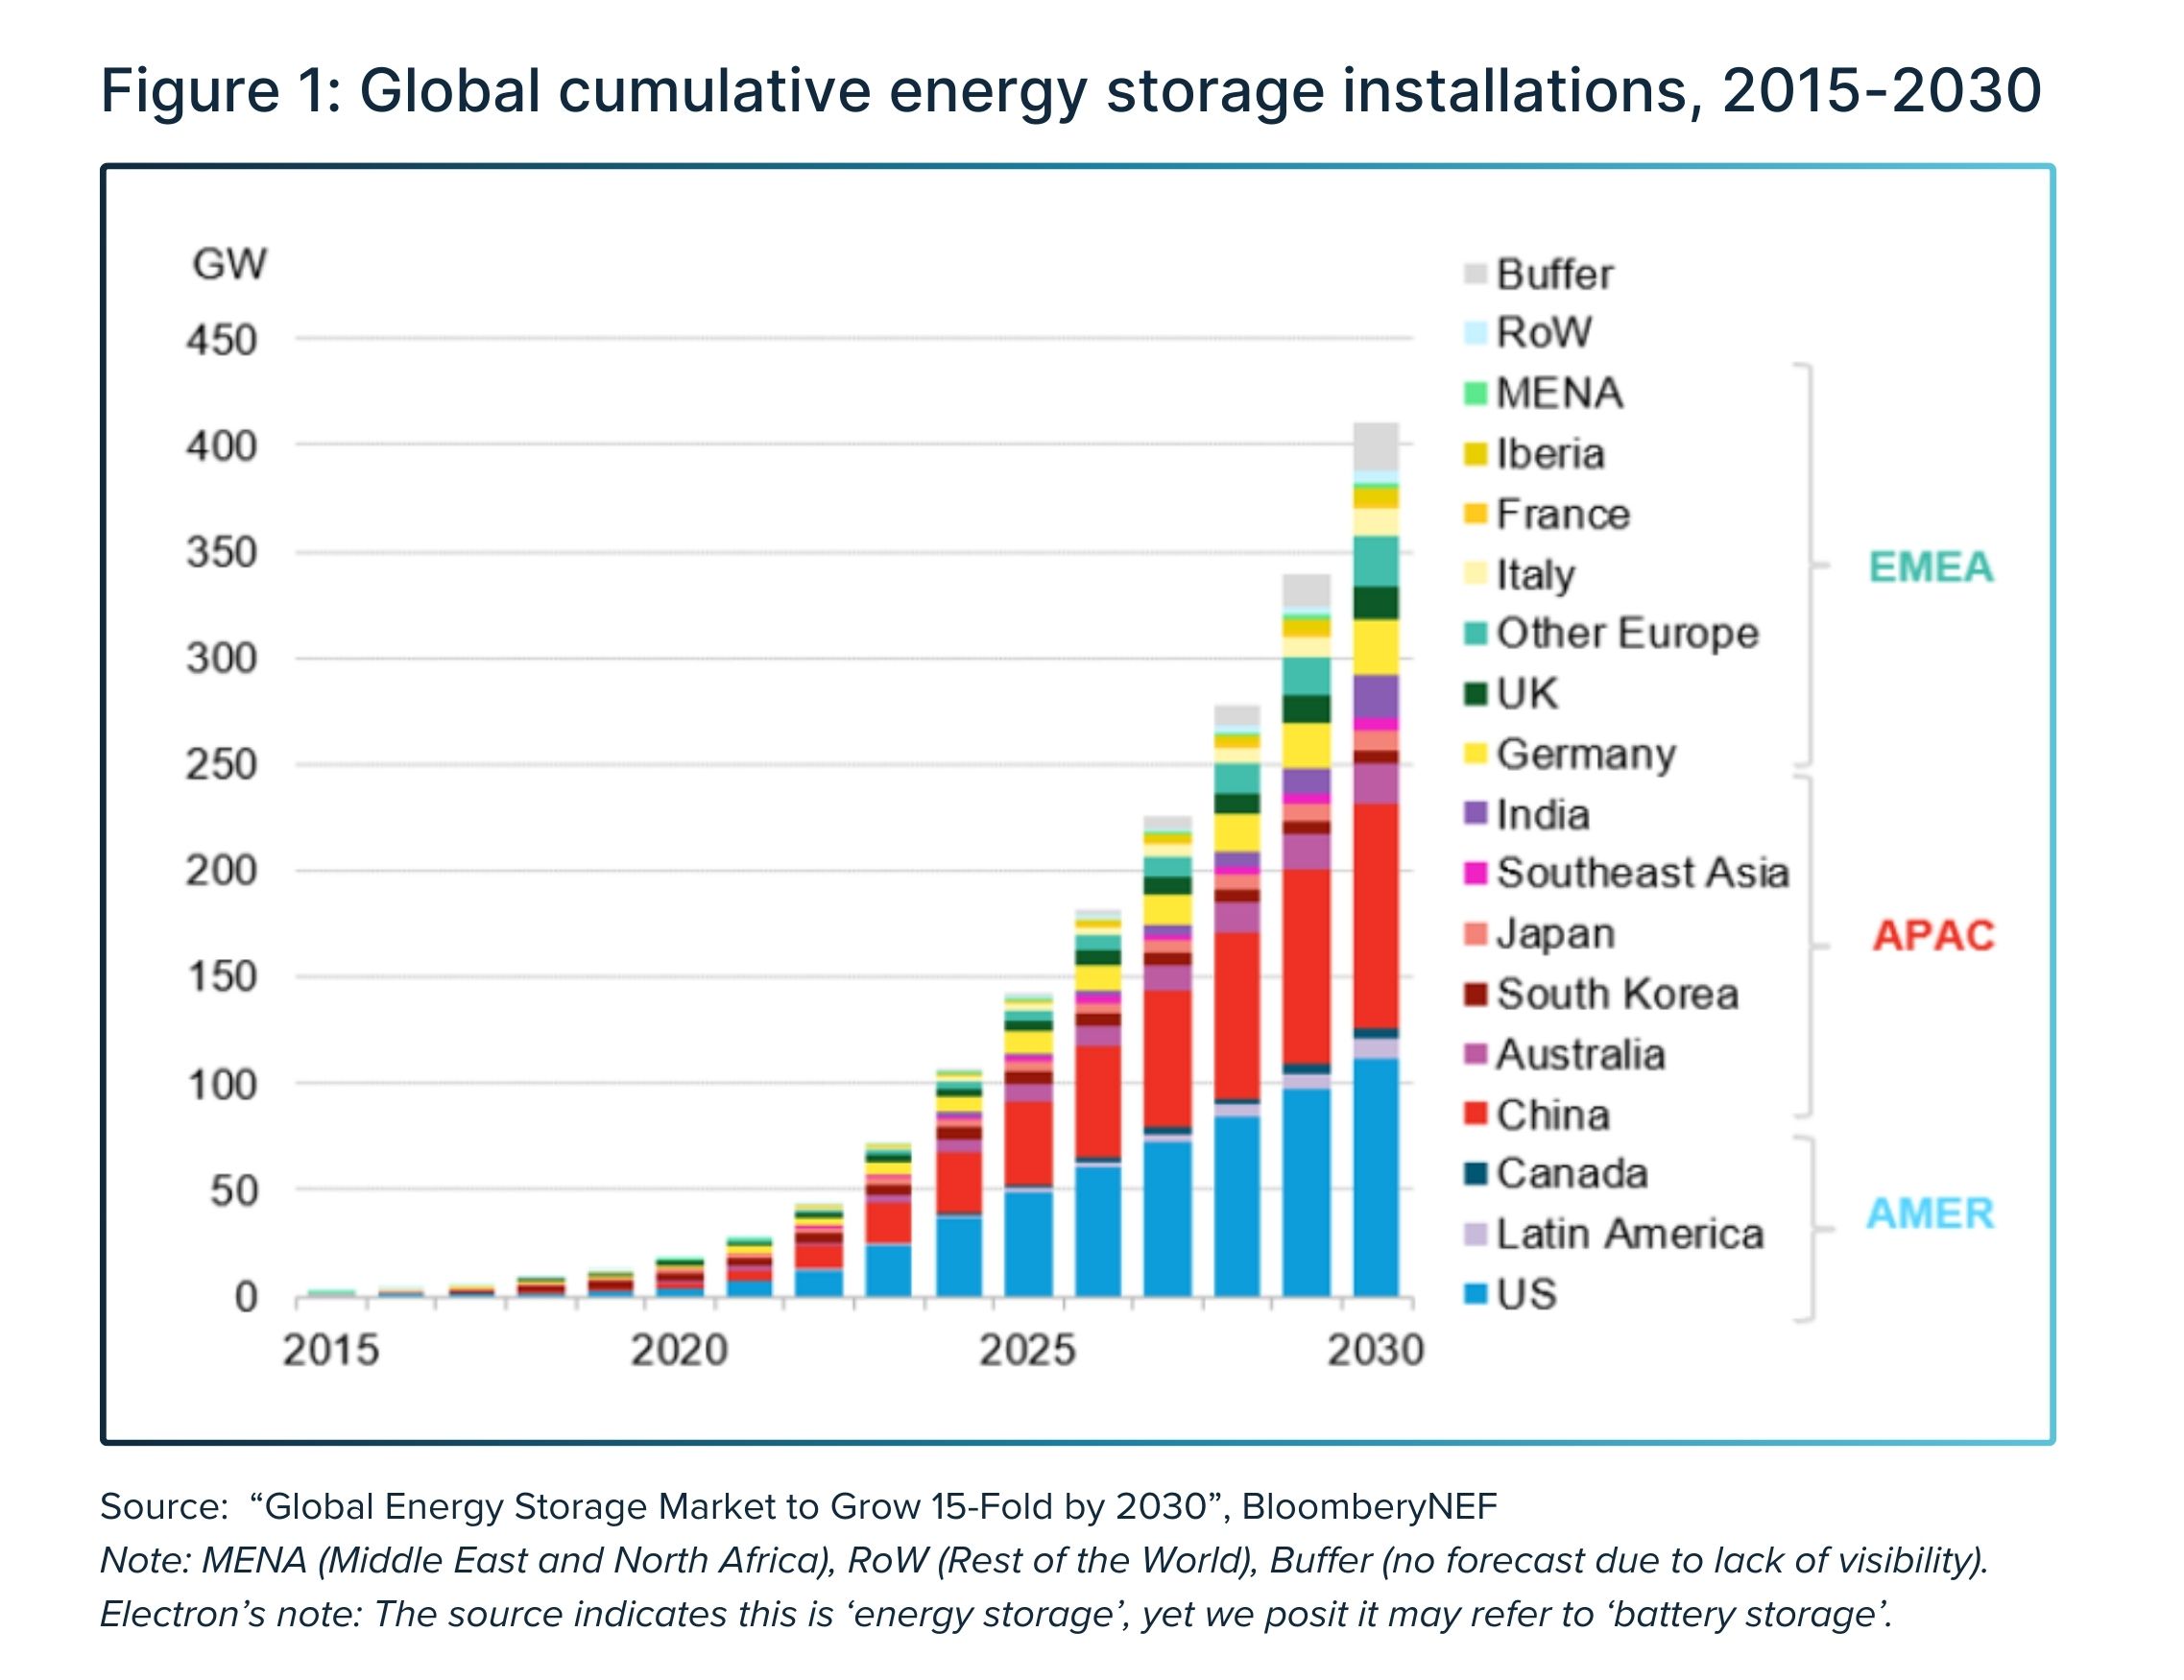 Energy storage installations from 2015-2030